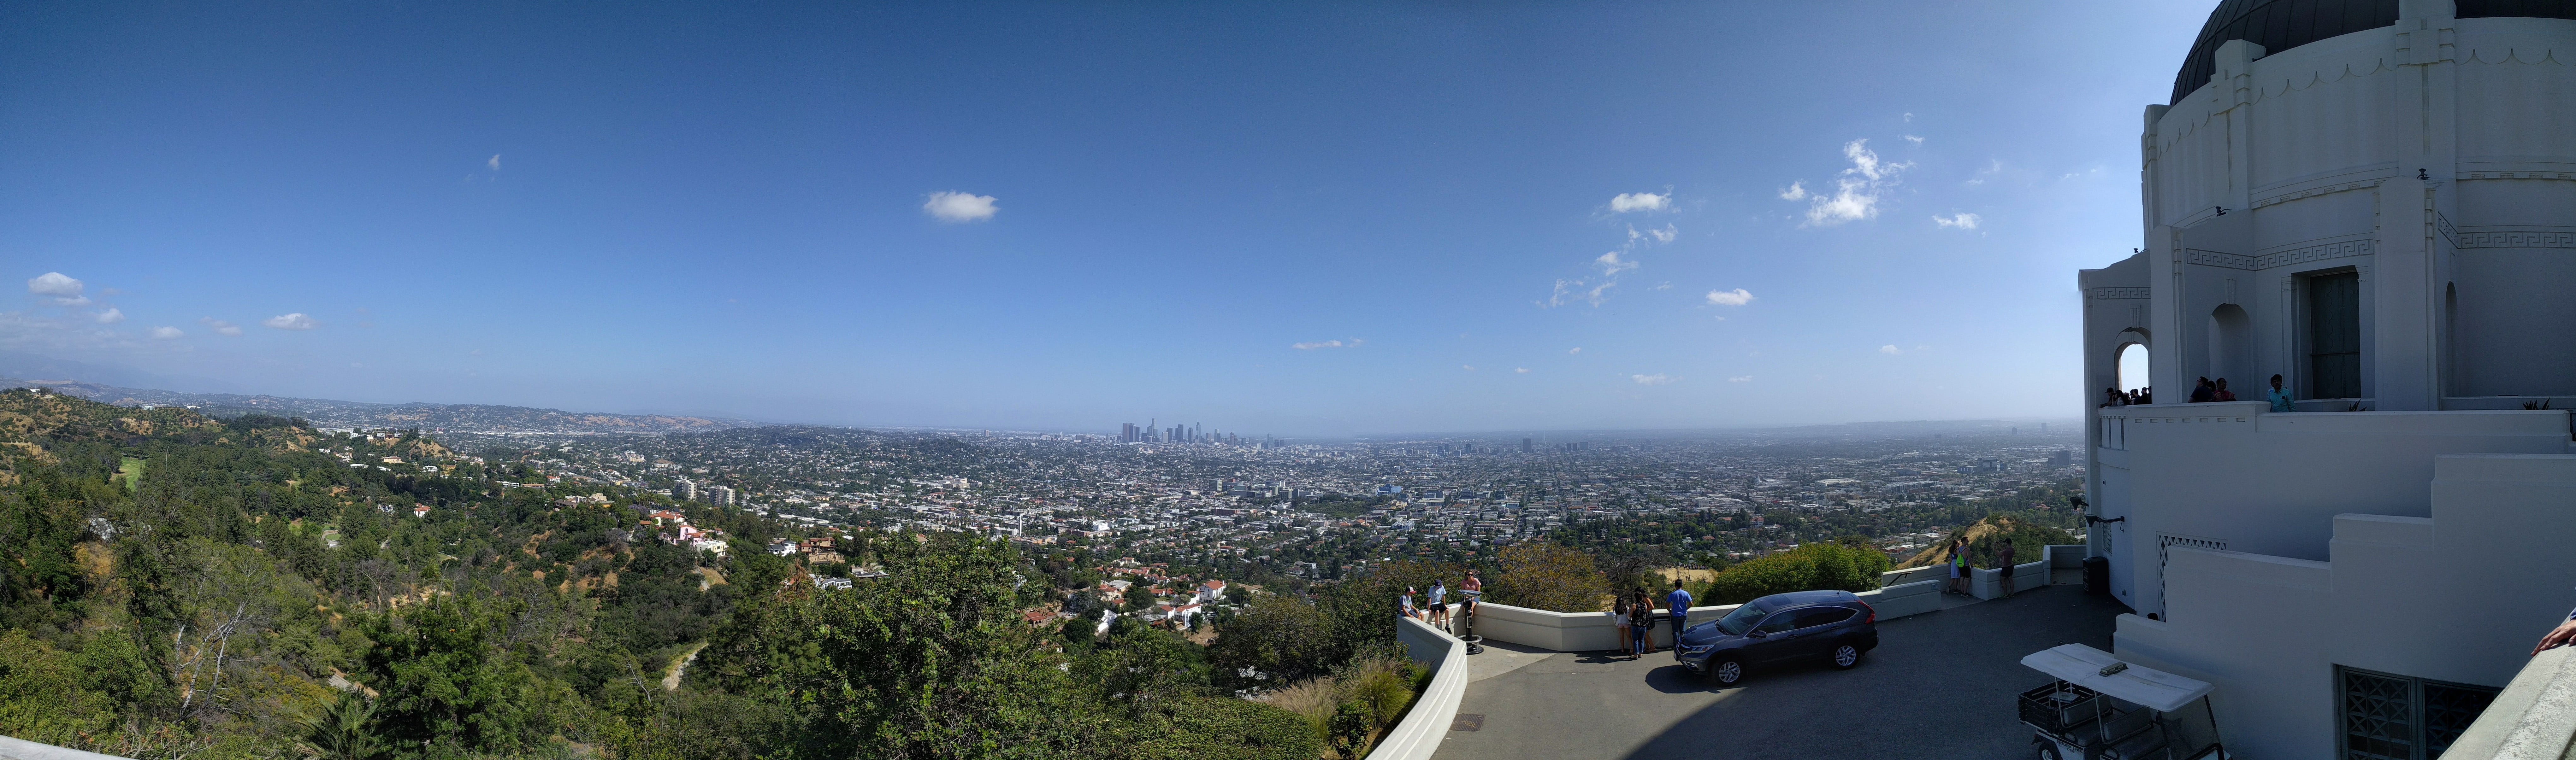 griffith, observatory, angeles, california, usa, city, park